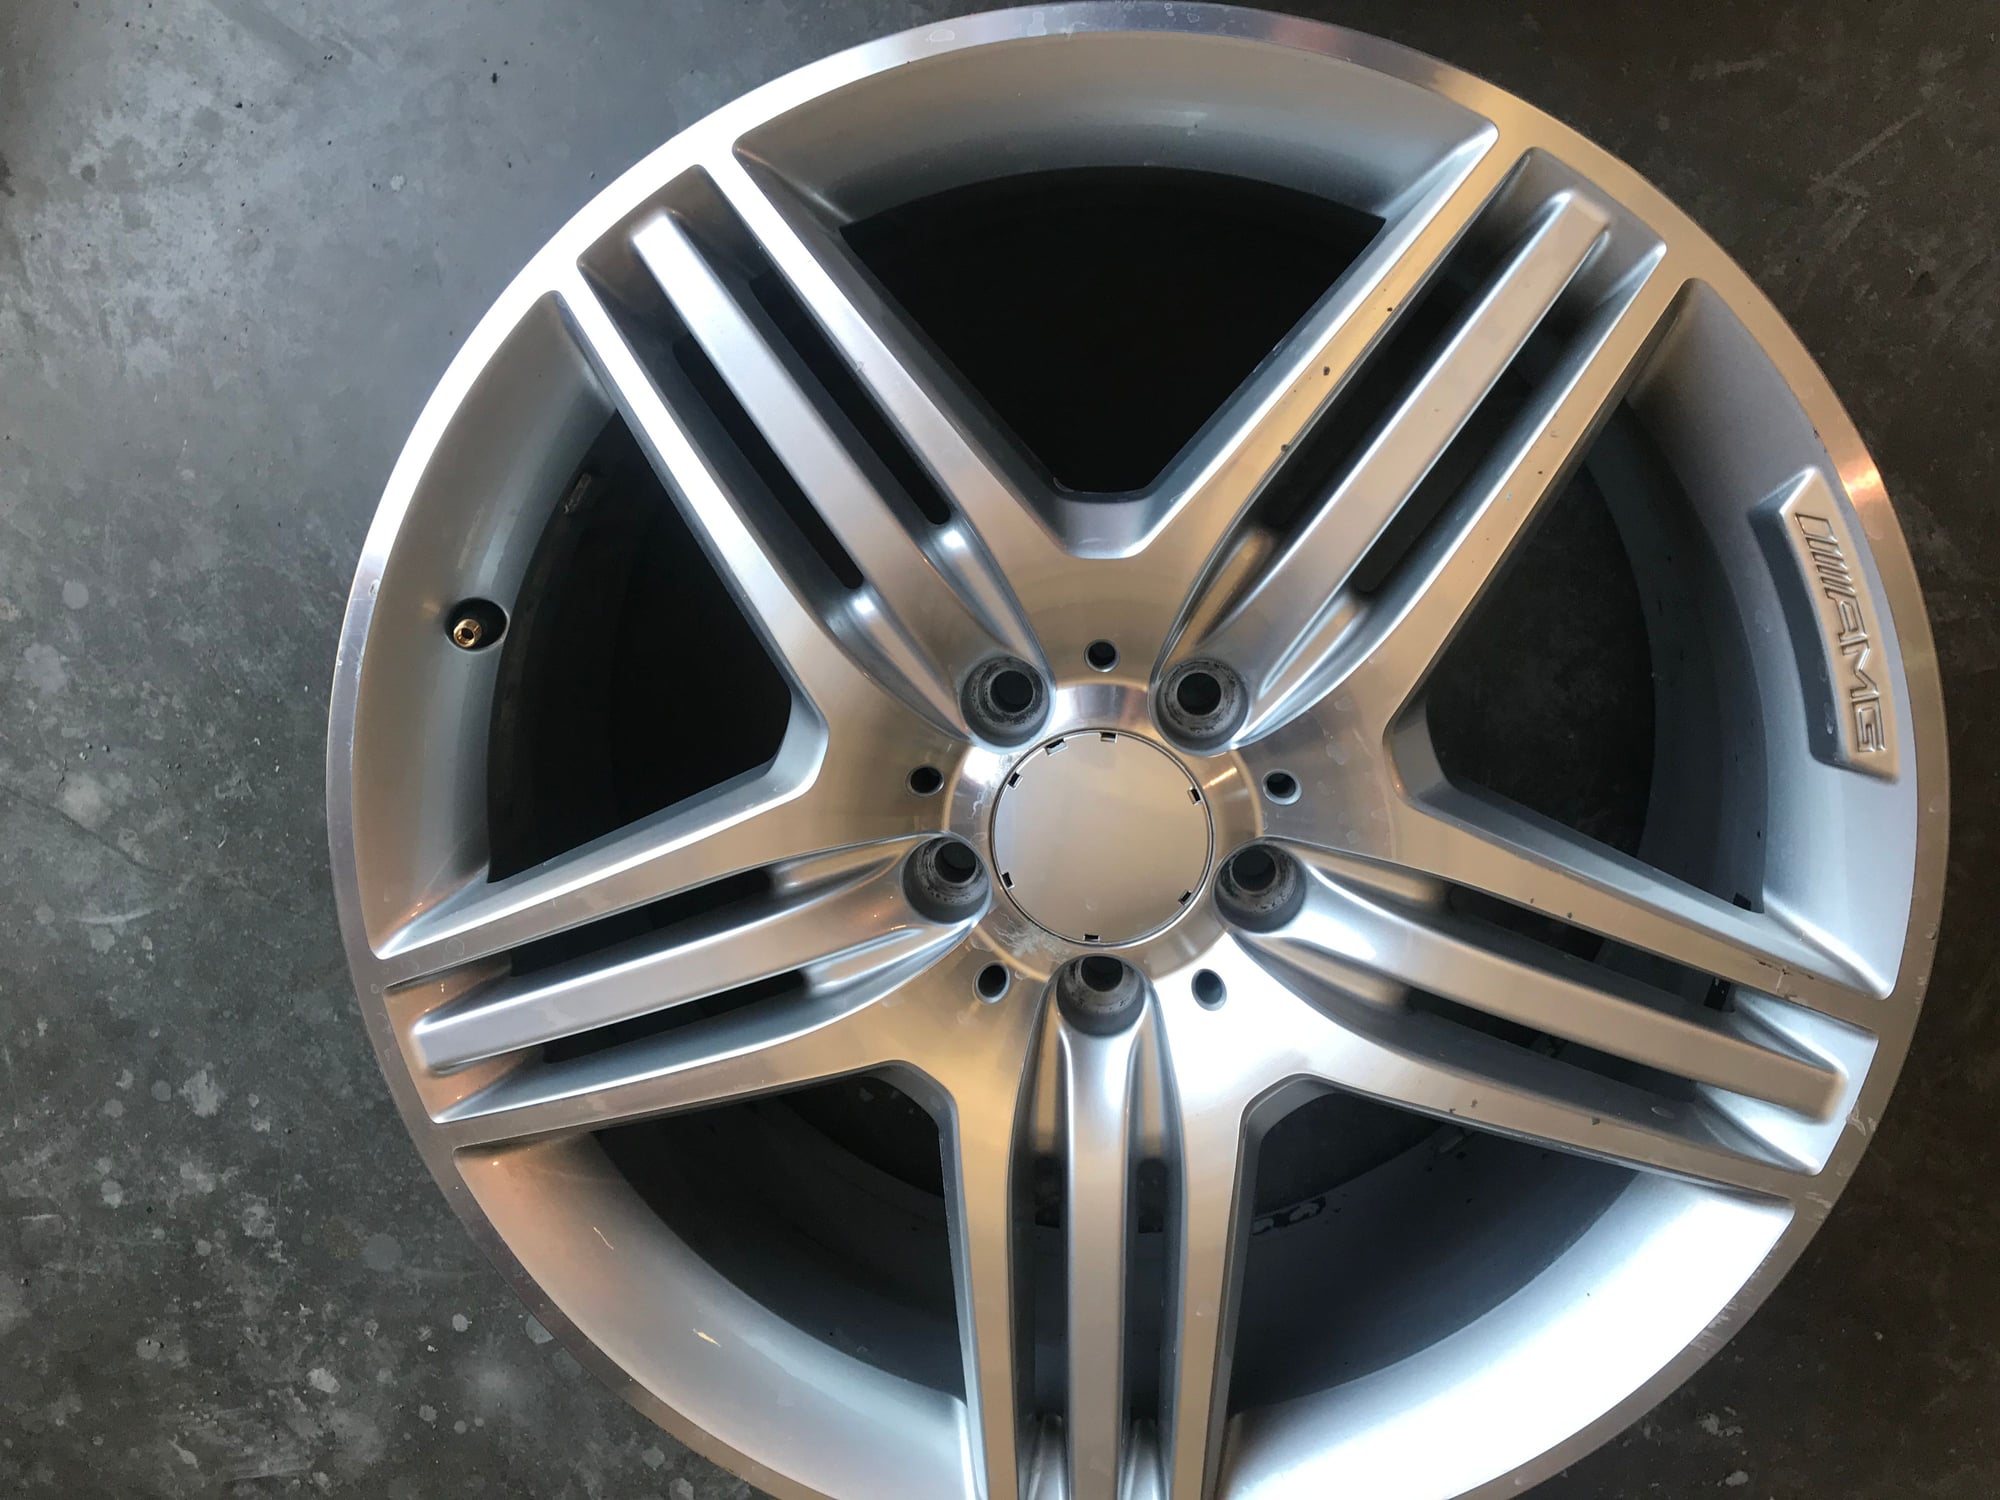 Wheels and Tires/Axles - AMG wheels for S-Class - Used - 2014 to 2019 Mercedes-Benz S550 - Greensboro, NC 27407, United States